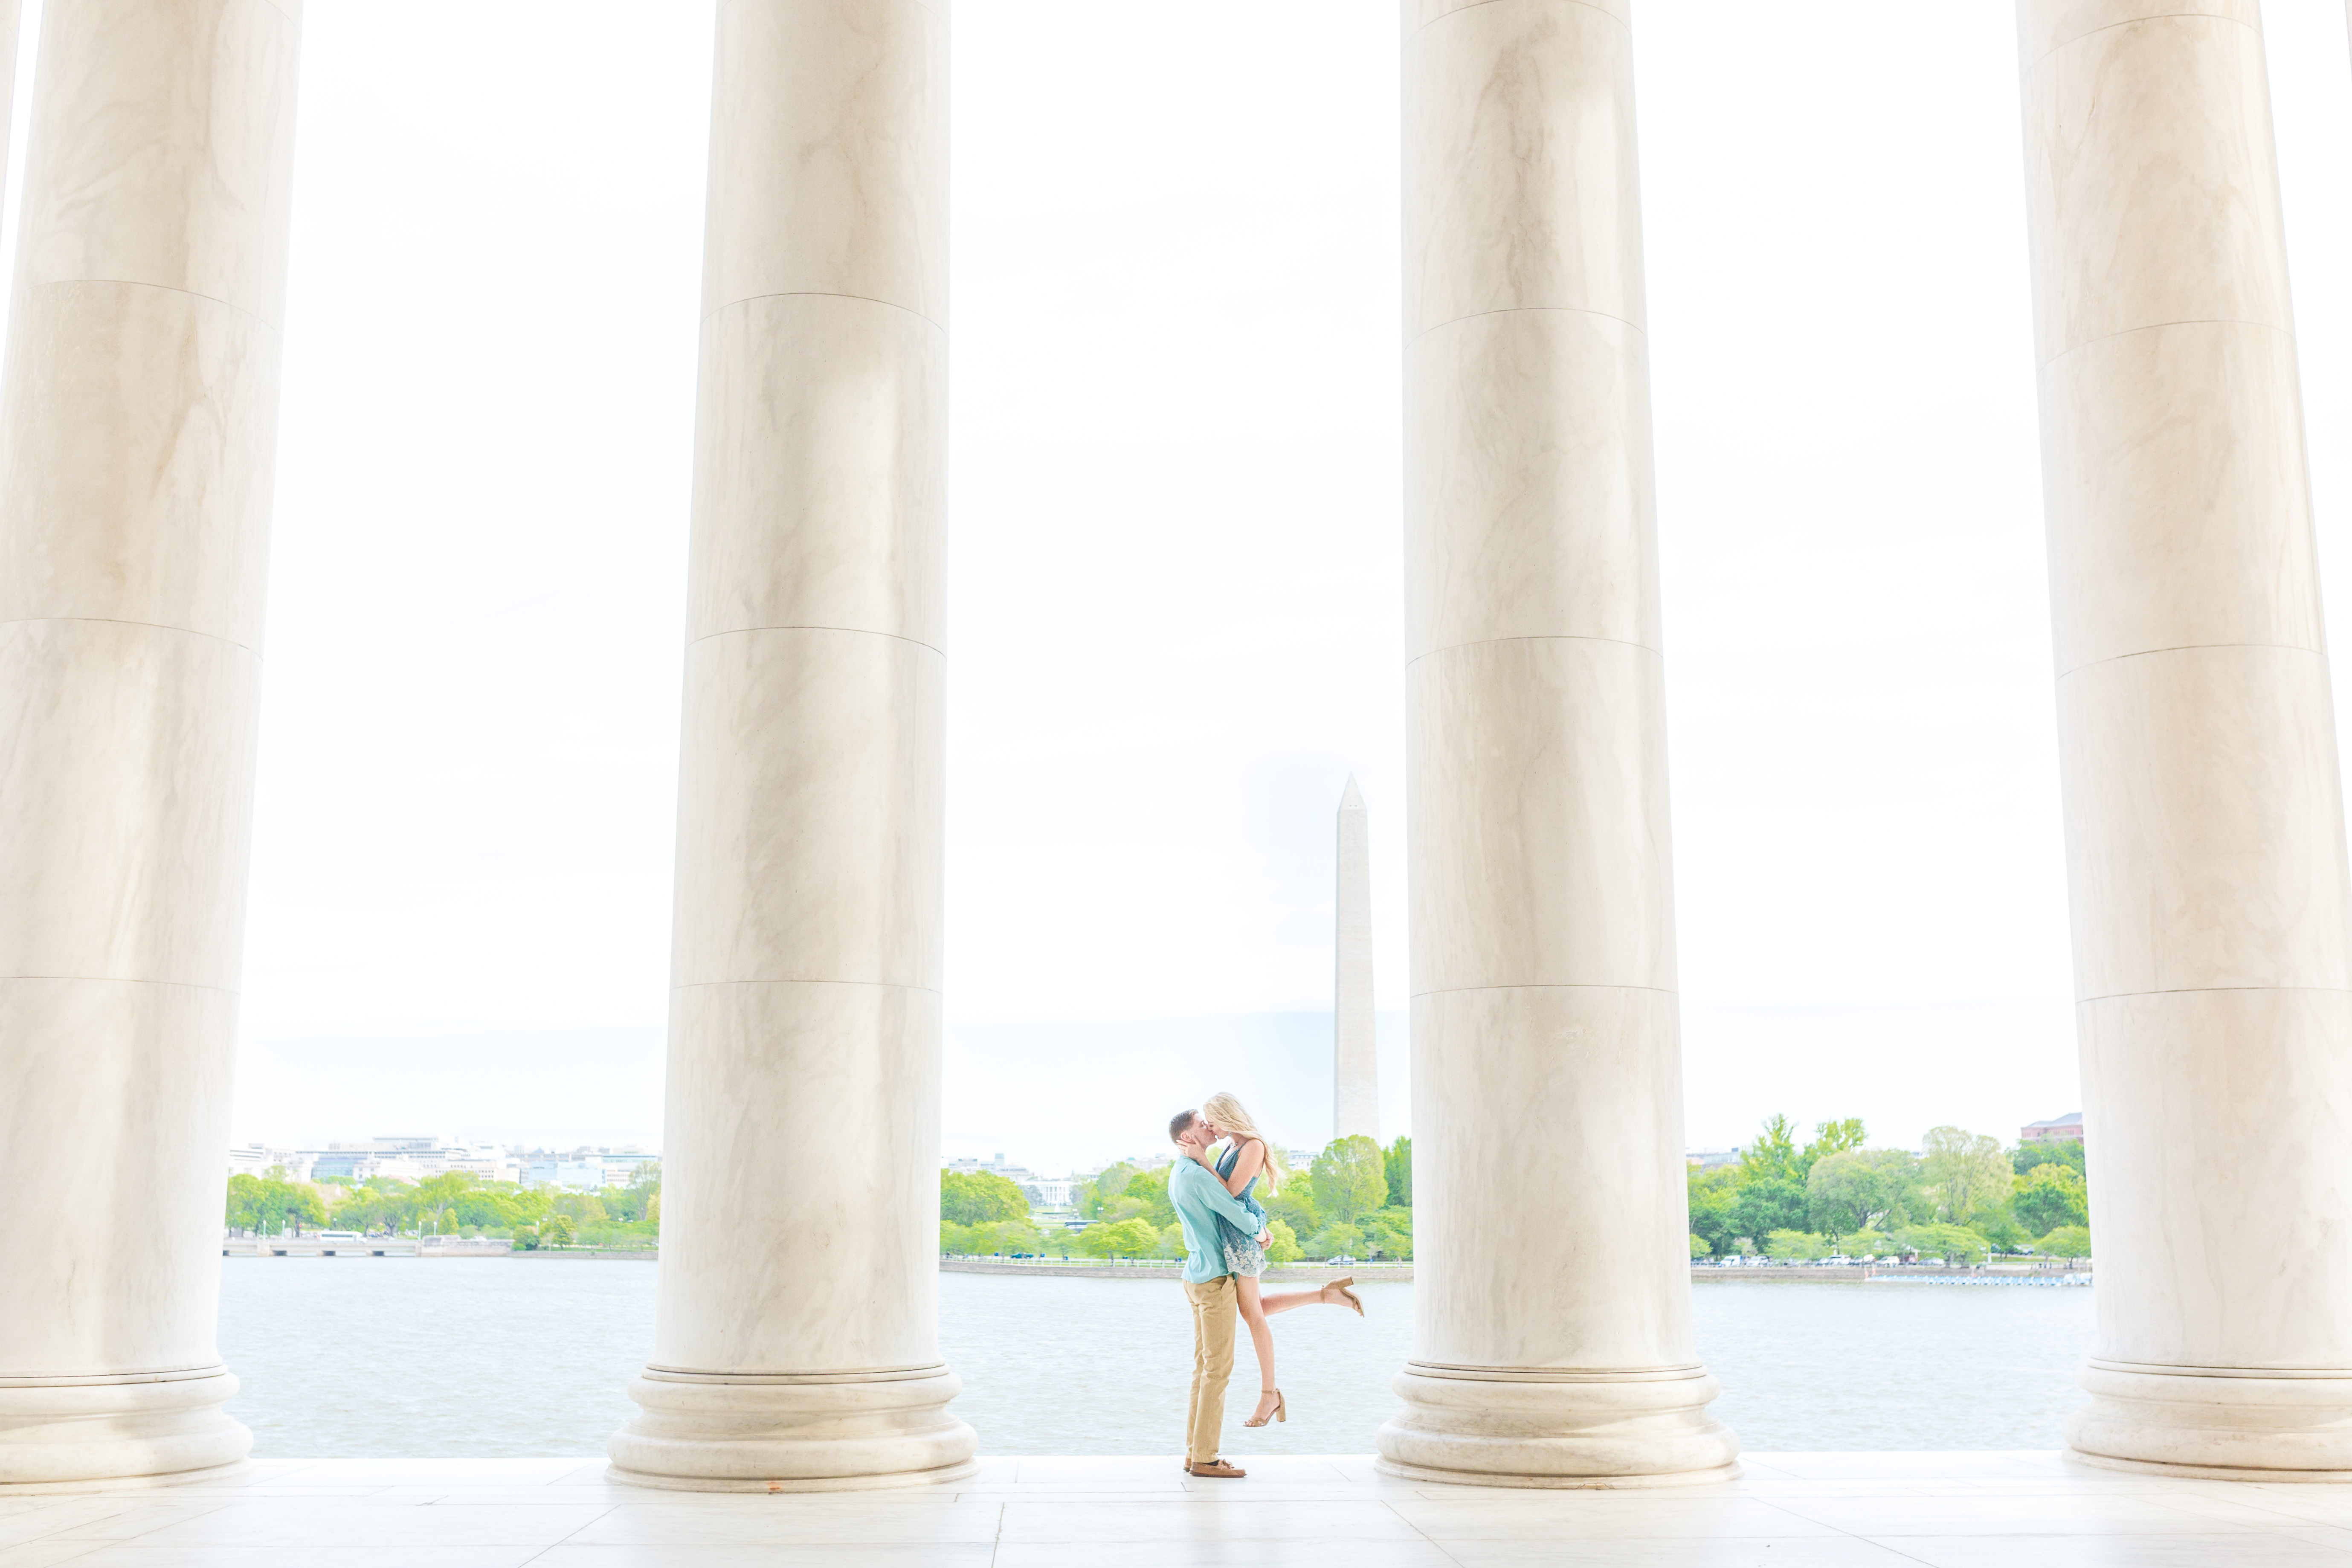 couple kissing in jefferson memorial columns with Washington Monument in background, boy lifting girl off ground